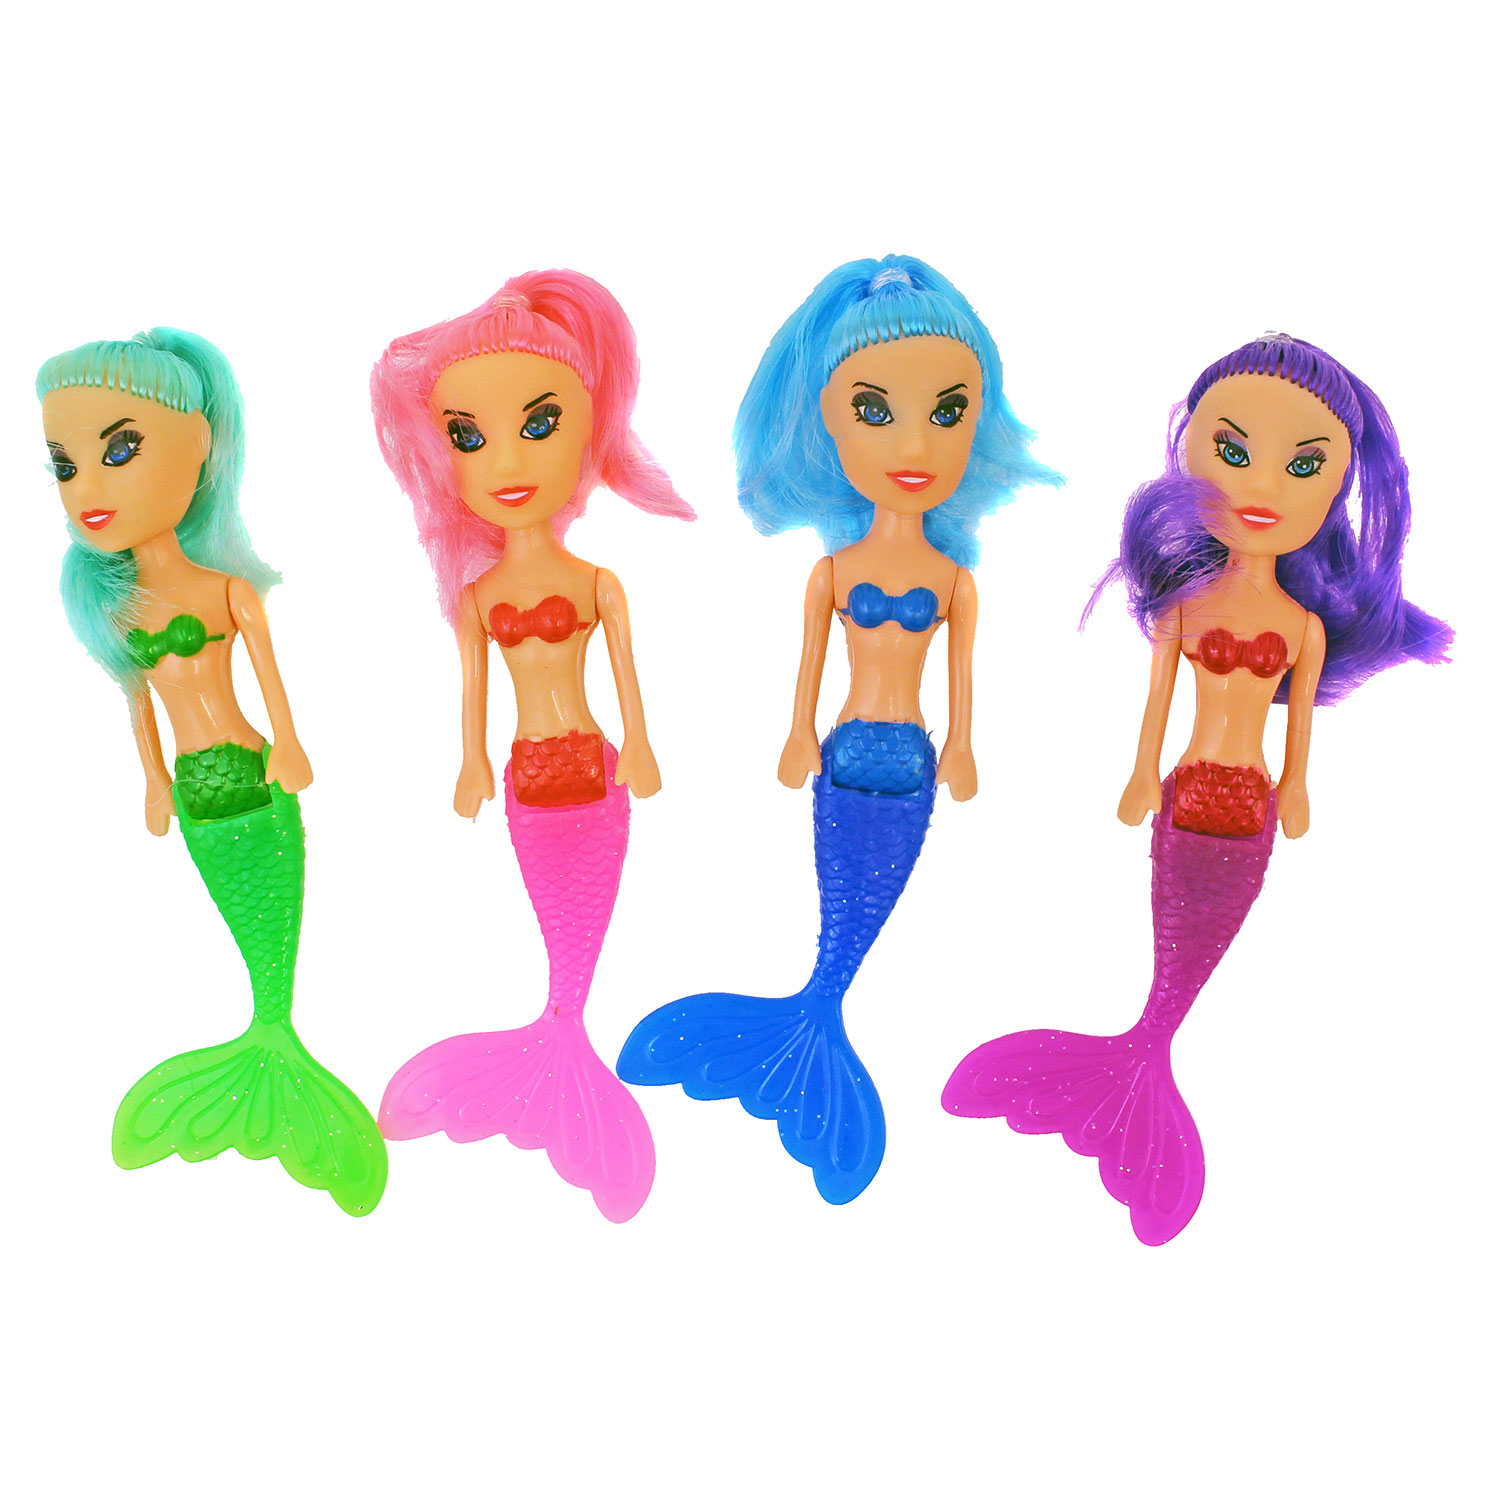 Mermaid Dolls - 5 1/2 Inch - 12 Count: Rebecca's Toys & Prizes